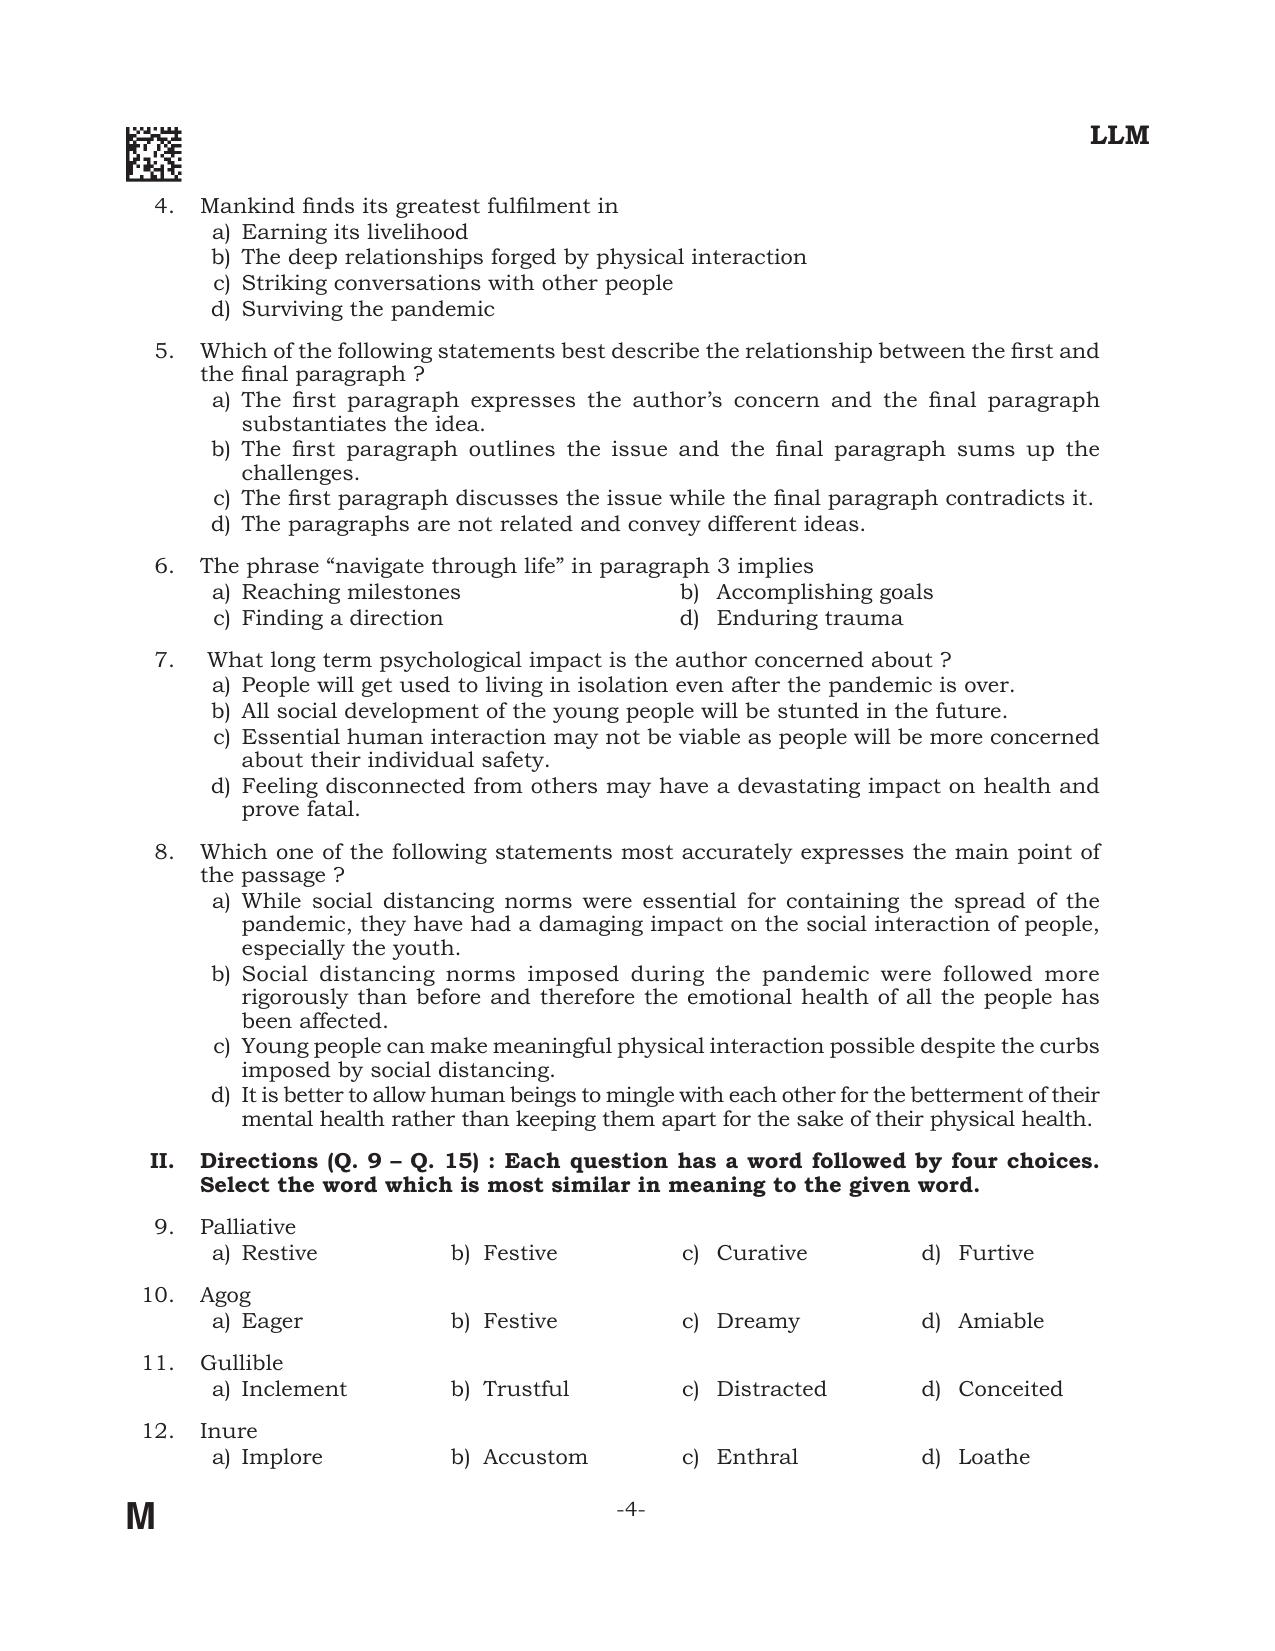 AILET 2022 Question Paper for LL.M - Page 4